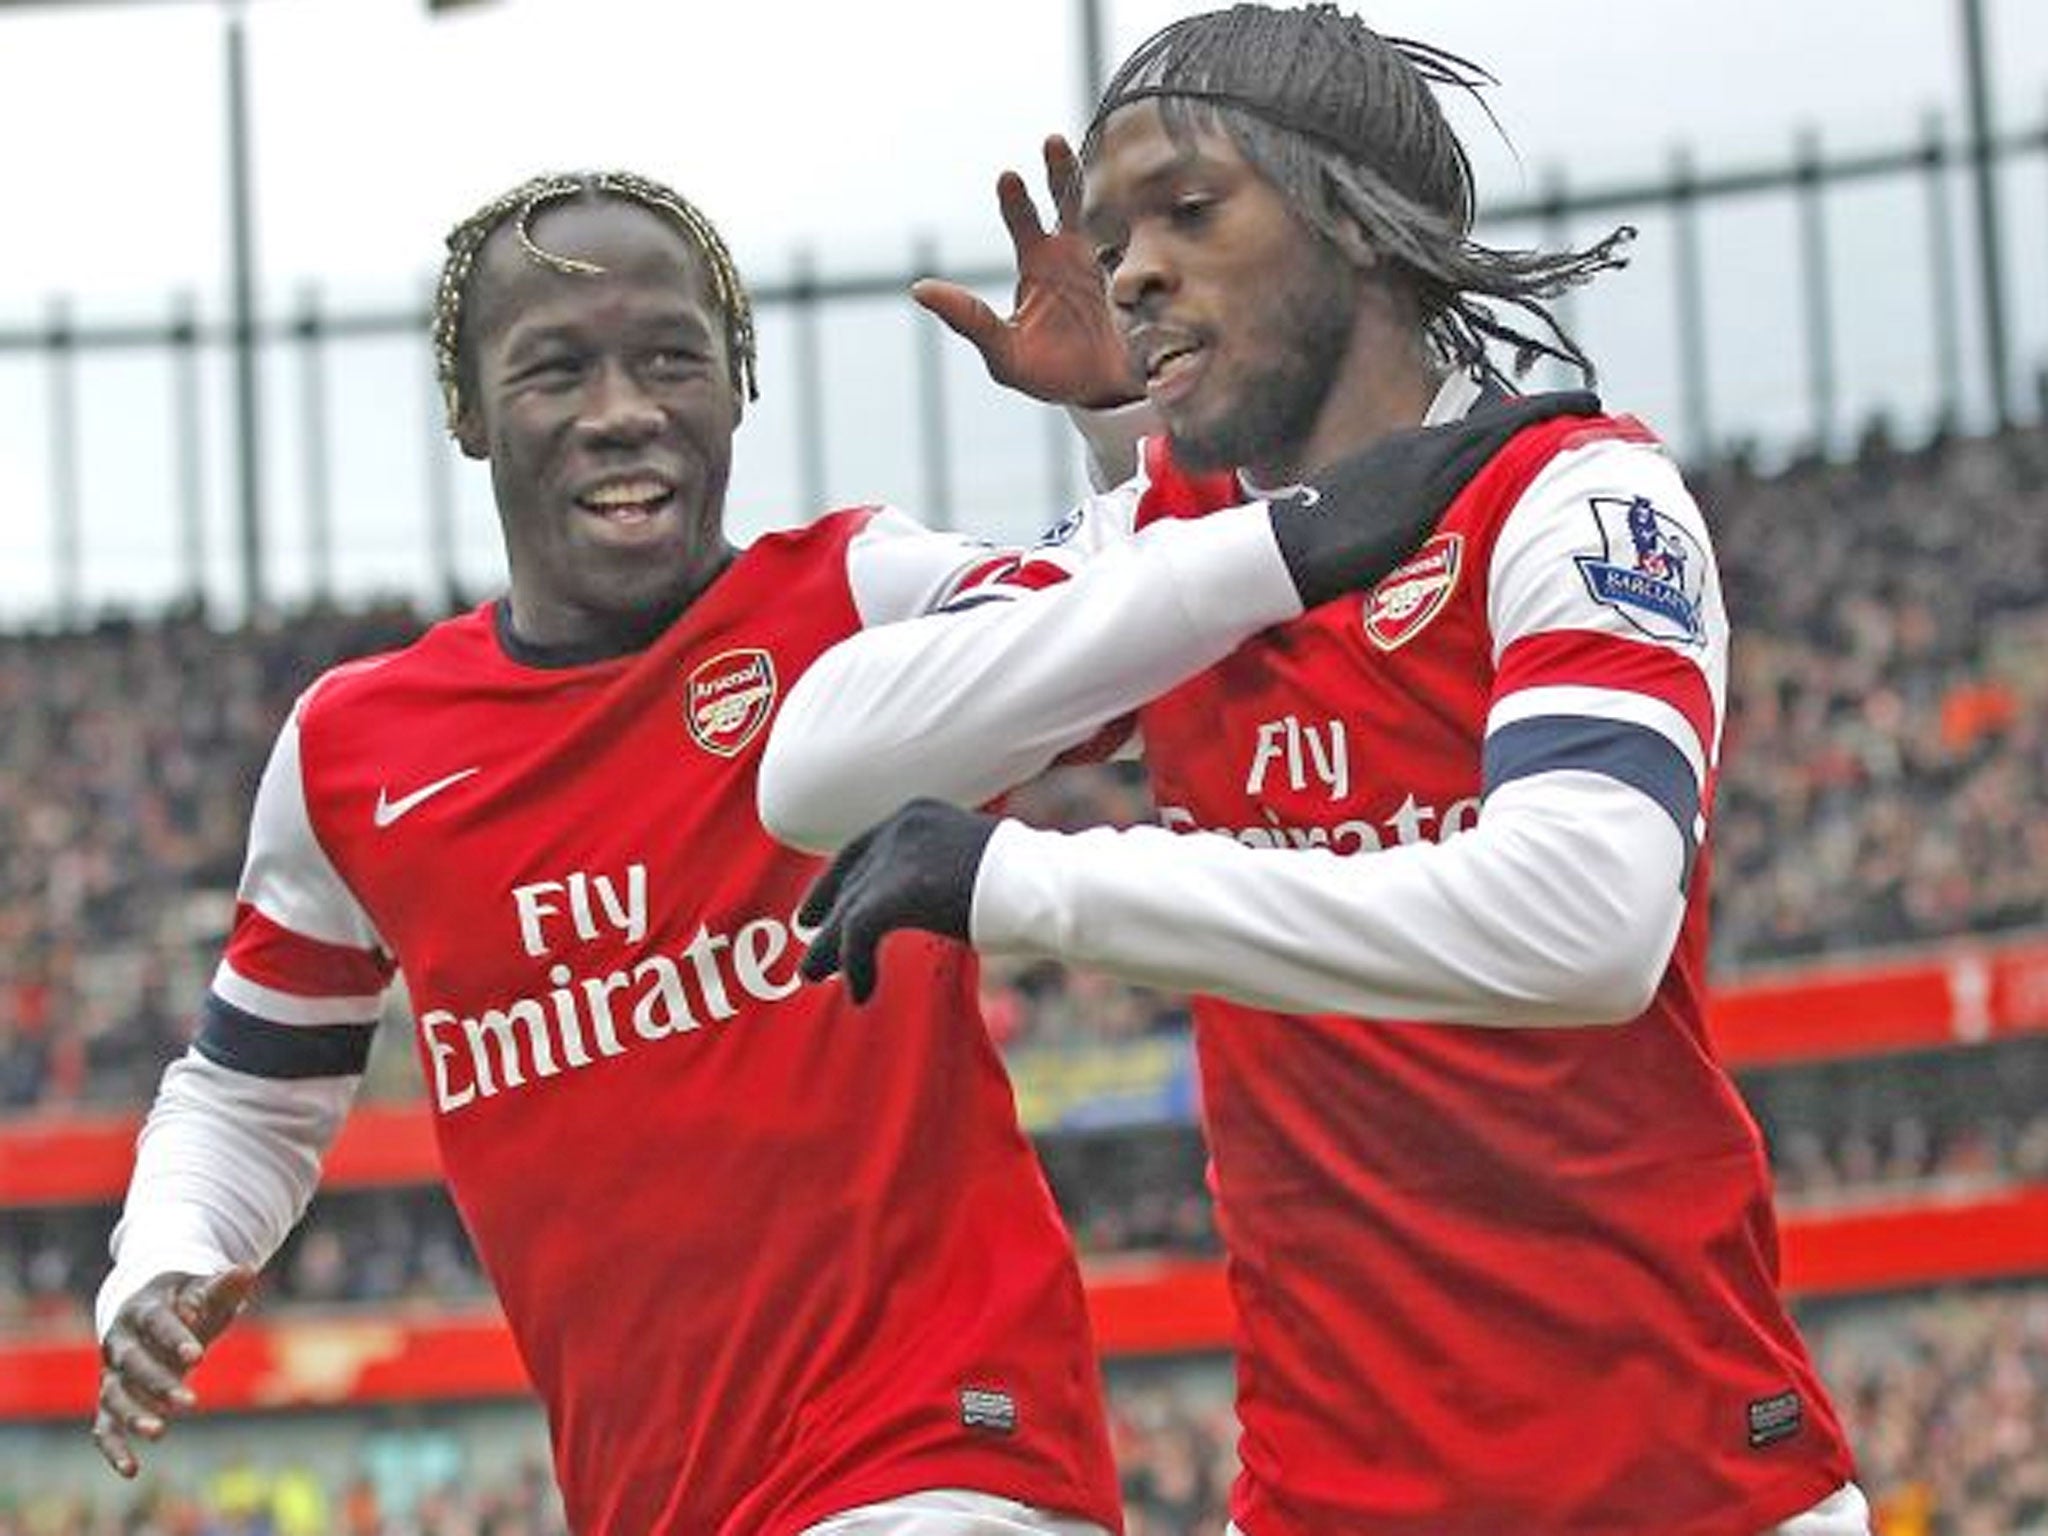 Gervinho (right) is congratulated on his goal by Bacary Sagna